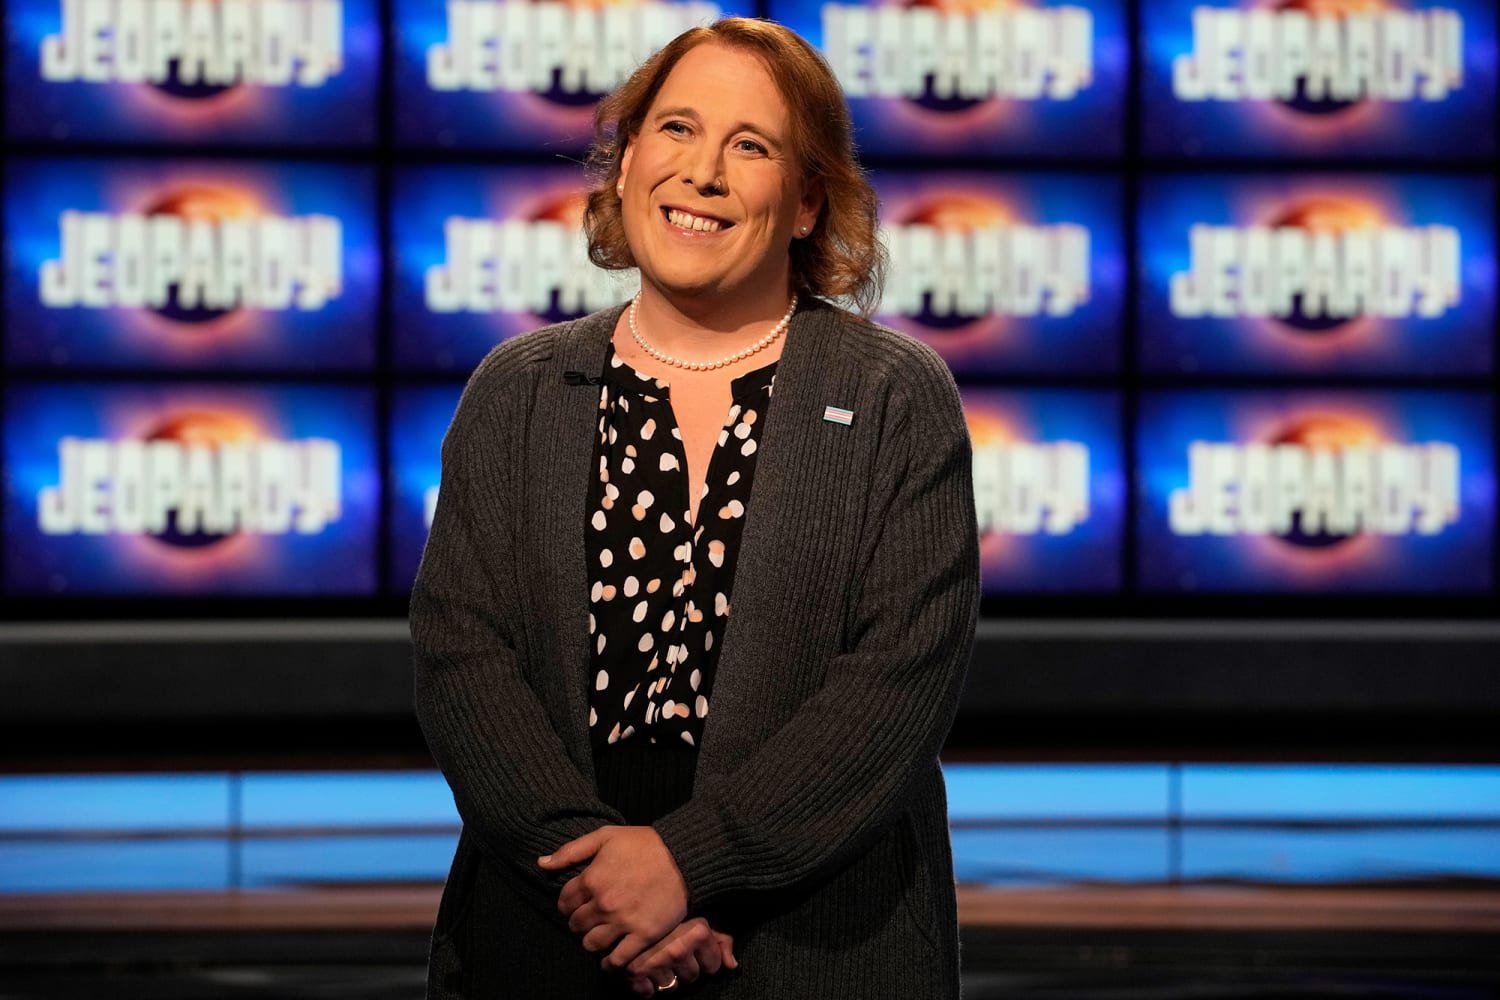 ‘Jeopardy!’ champ Amy Schneider says she was robbed over weekend